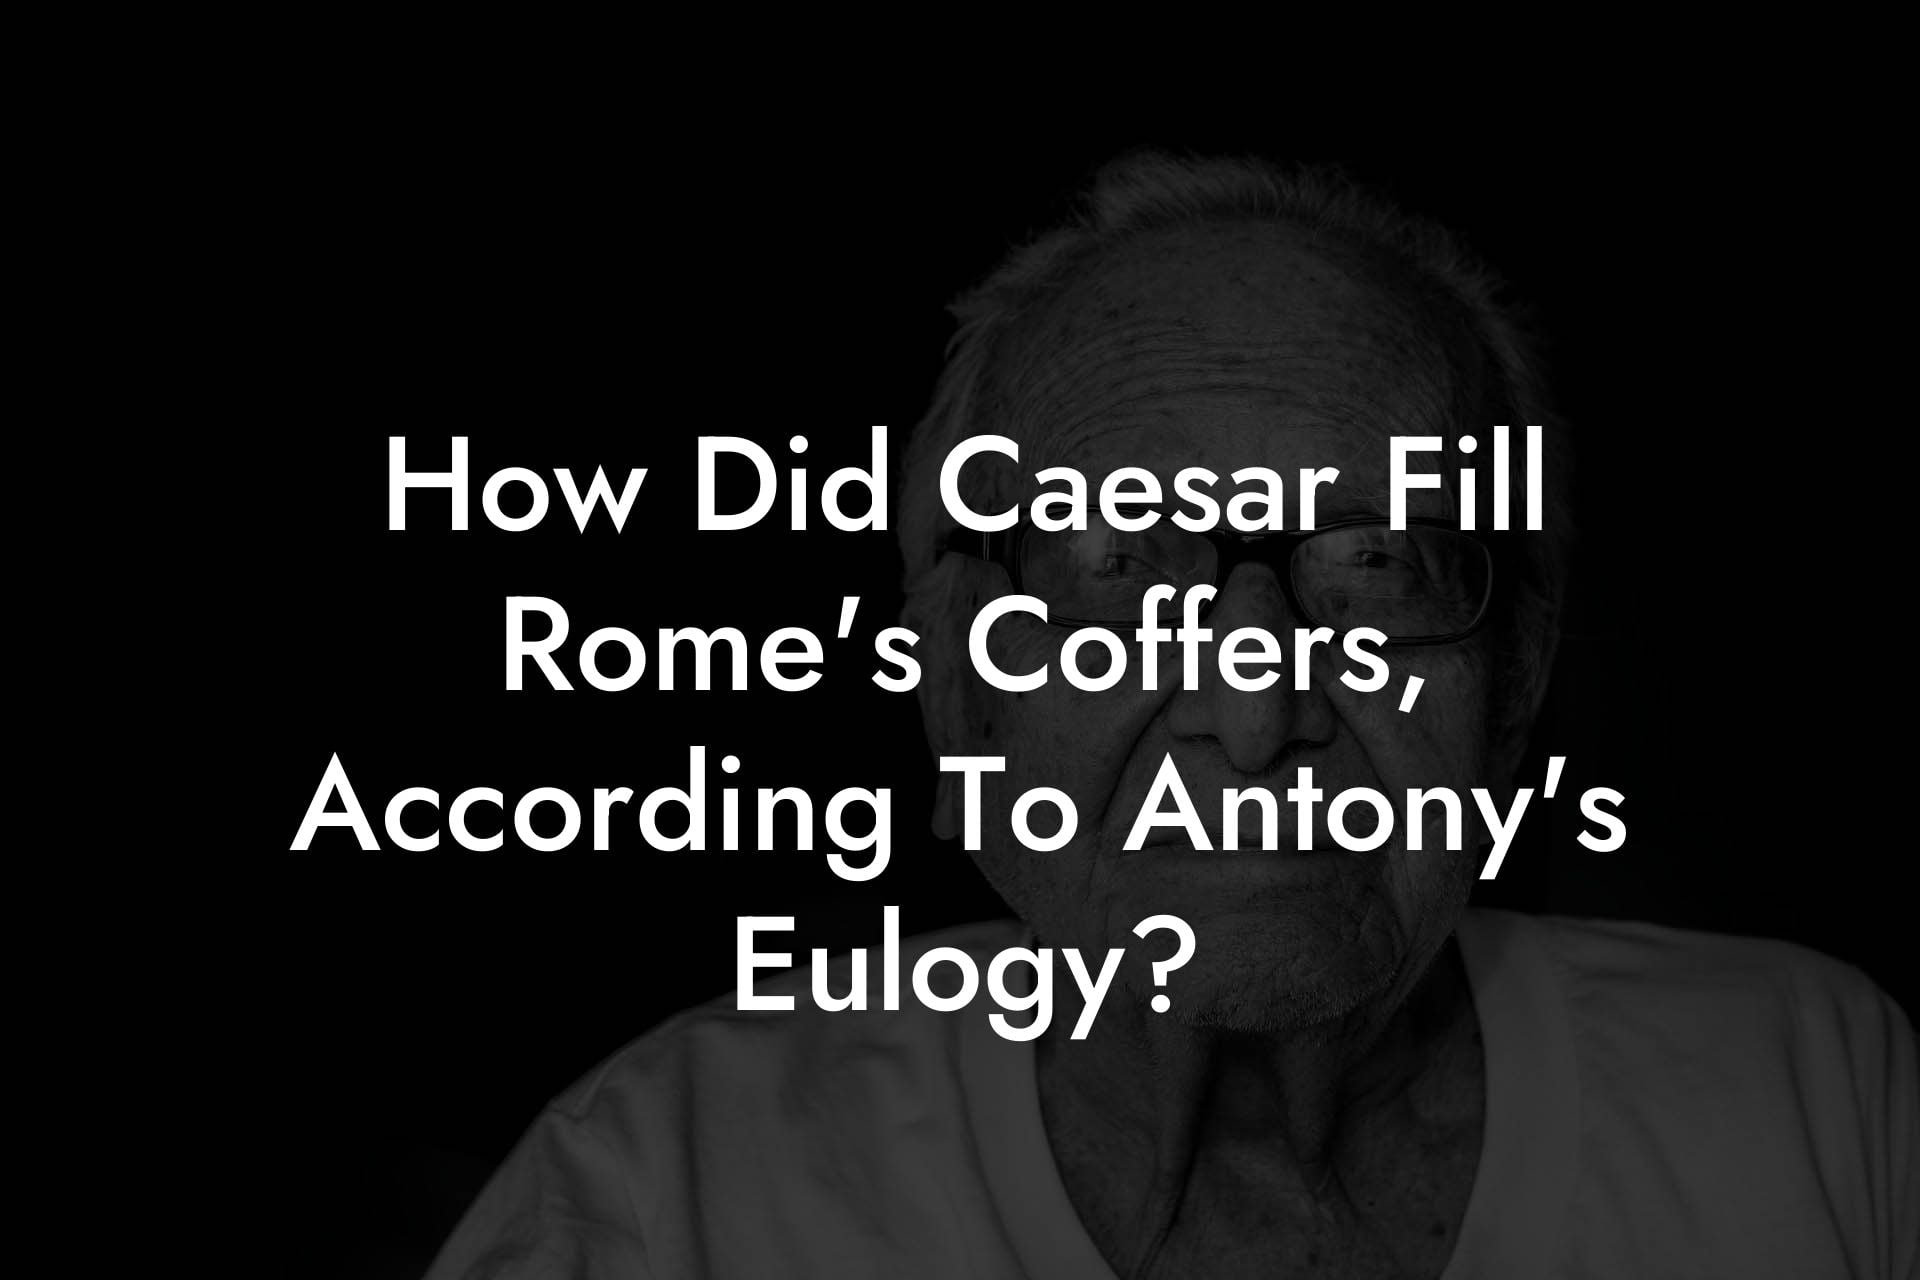 How Did Caesar Fill Rome's Coffers, According To Antony's Eulogy?